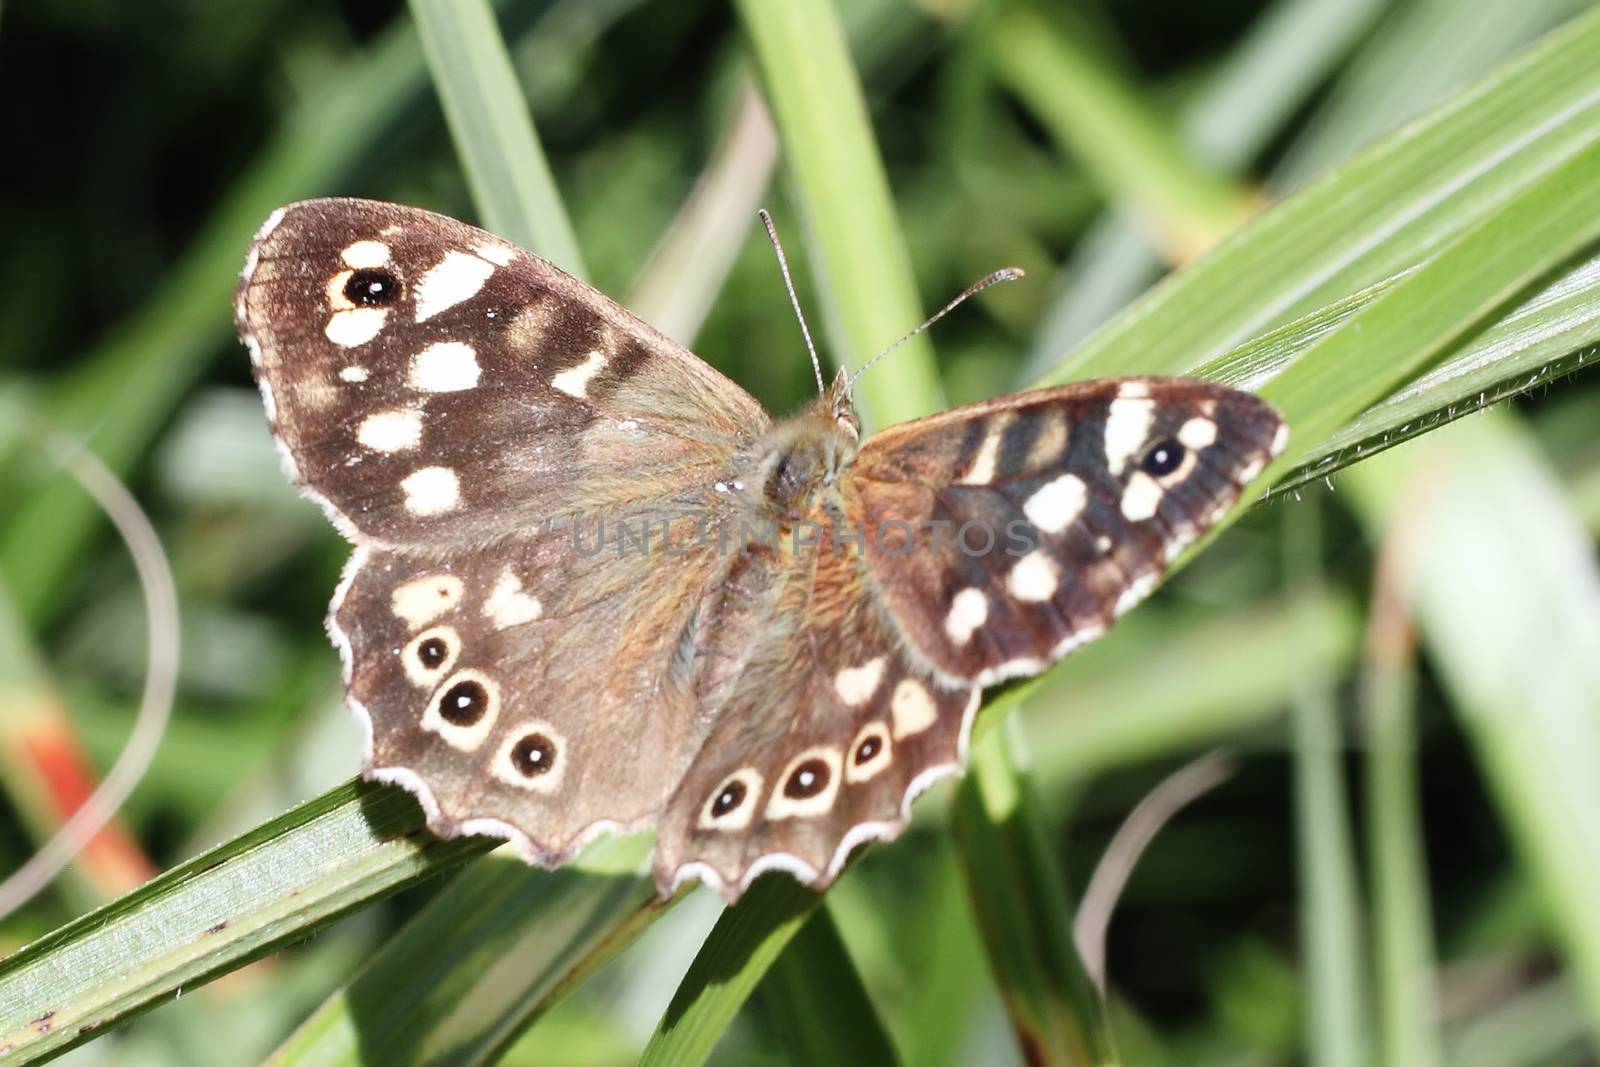 Speckled Wood butterfly insect resting on a blade of grass by ant